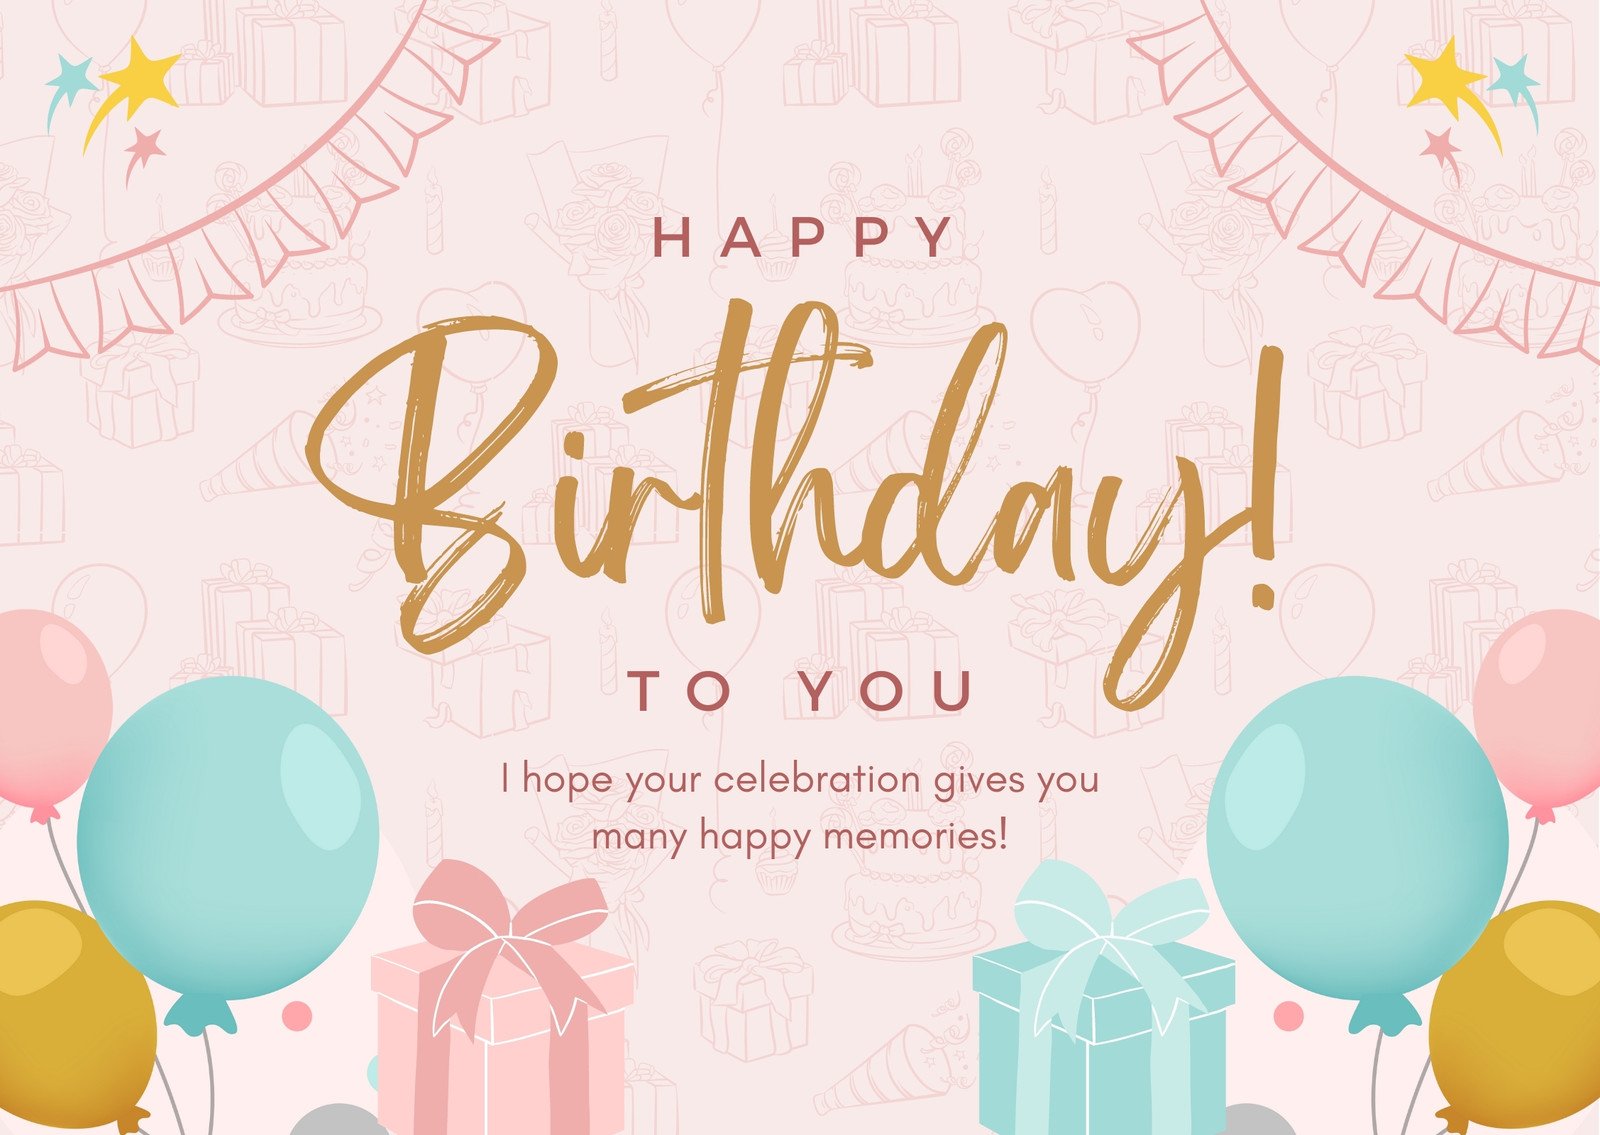 Birthday cards images